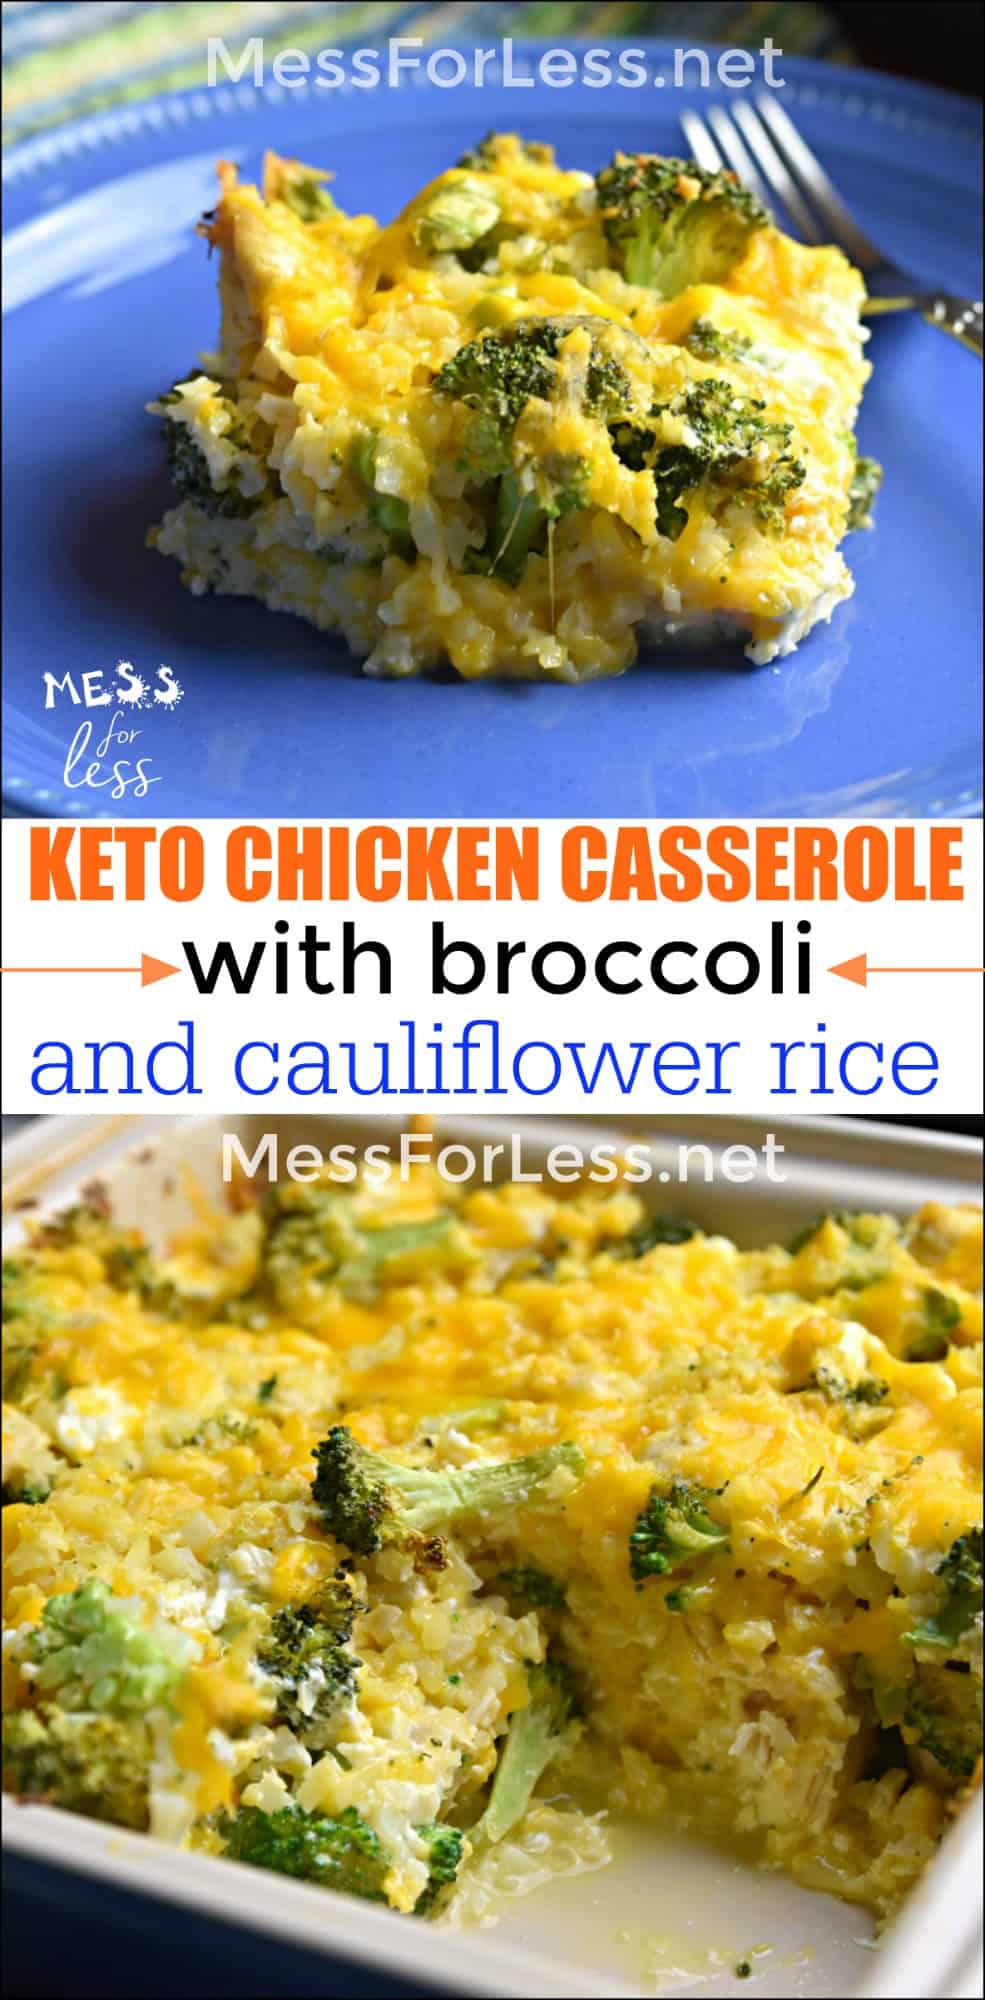 We loved this Keto Chicken Broccoli Casserole with Cauliflower. If you love broccoli and rice casserole, but hate the carbs, try this cheesy dish! #ketorecipe #Ketocasserole #lowcarbrecipe